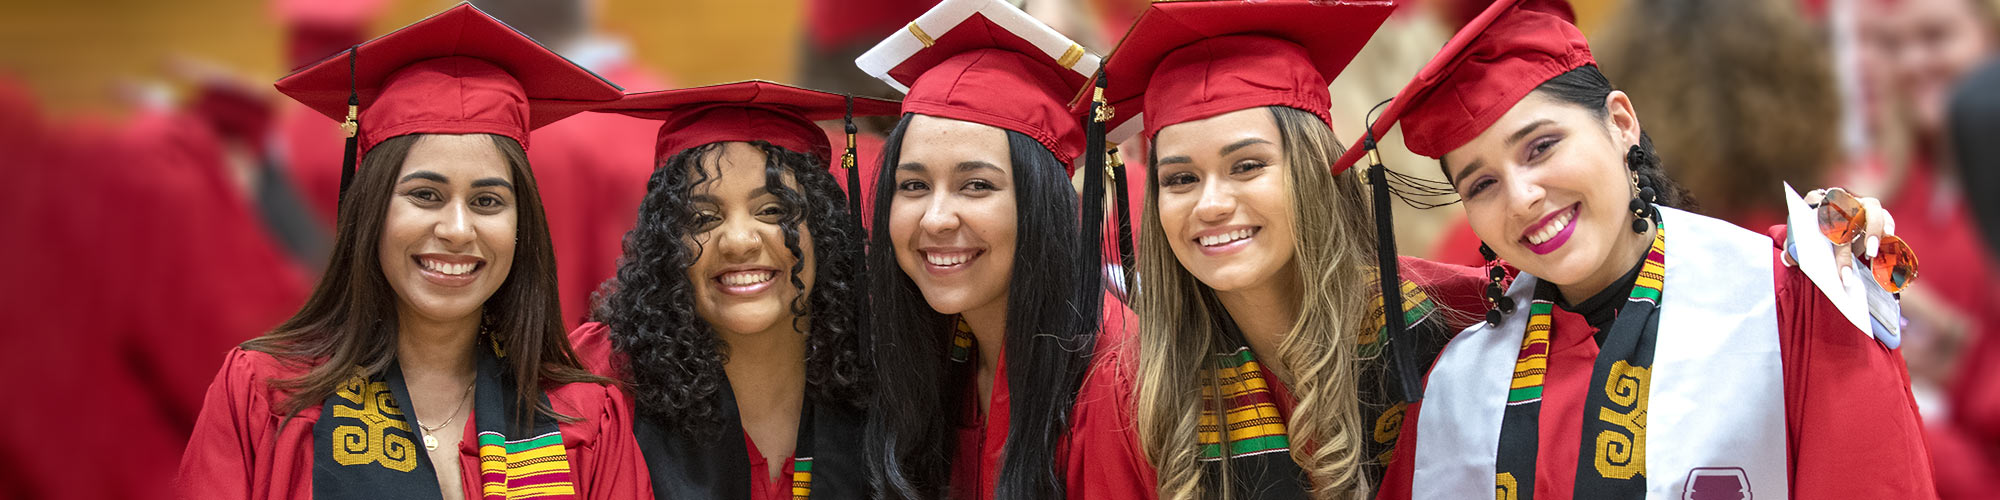 Group of five students smiles in a camera-aware photo during Commencement